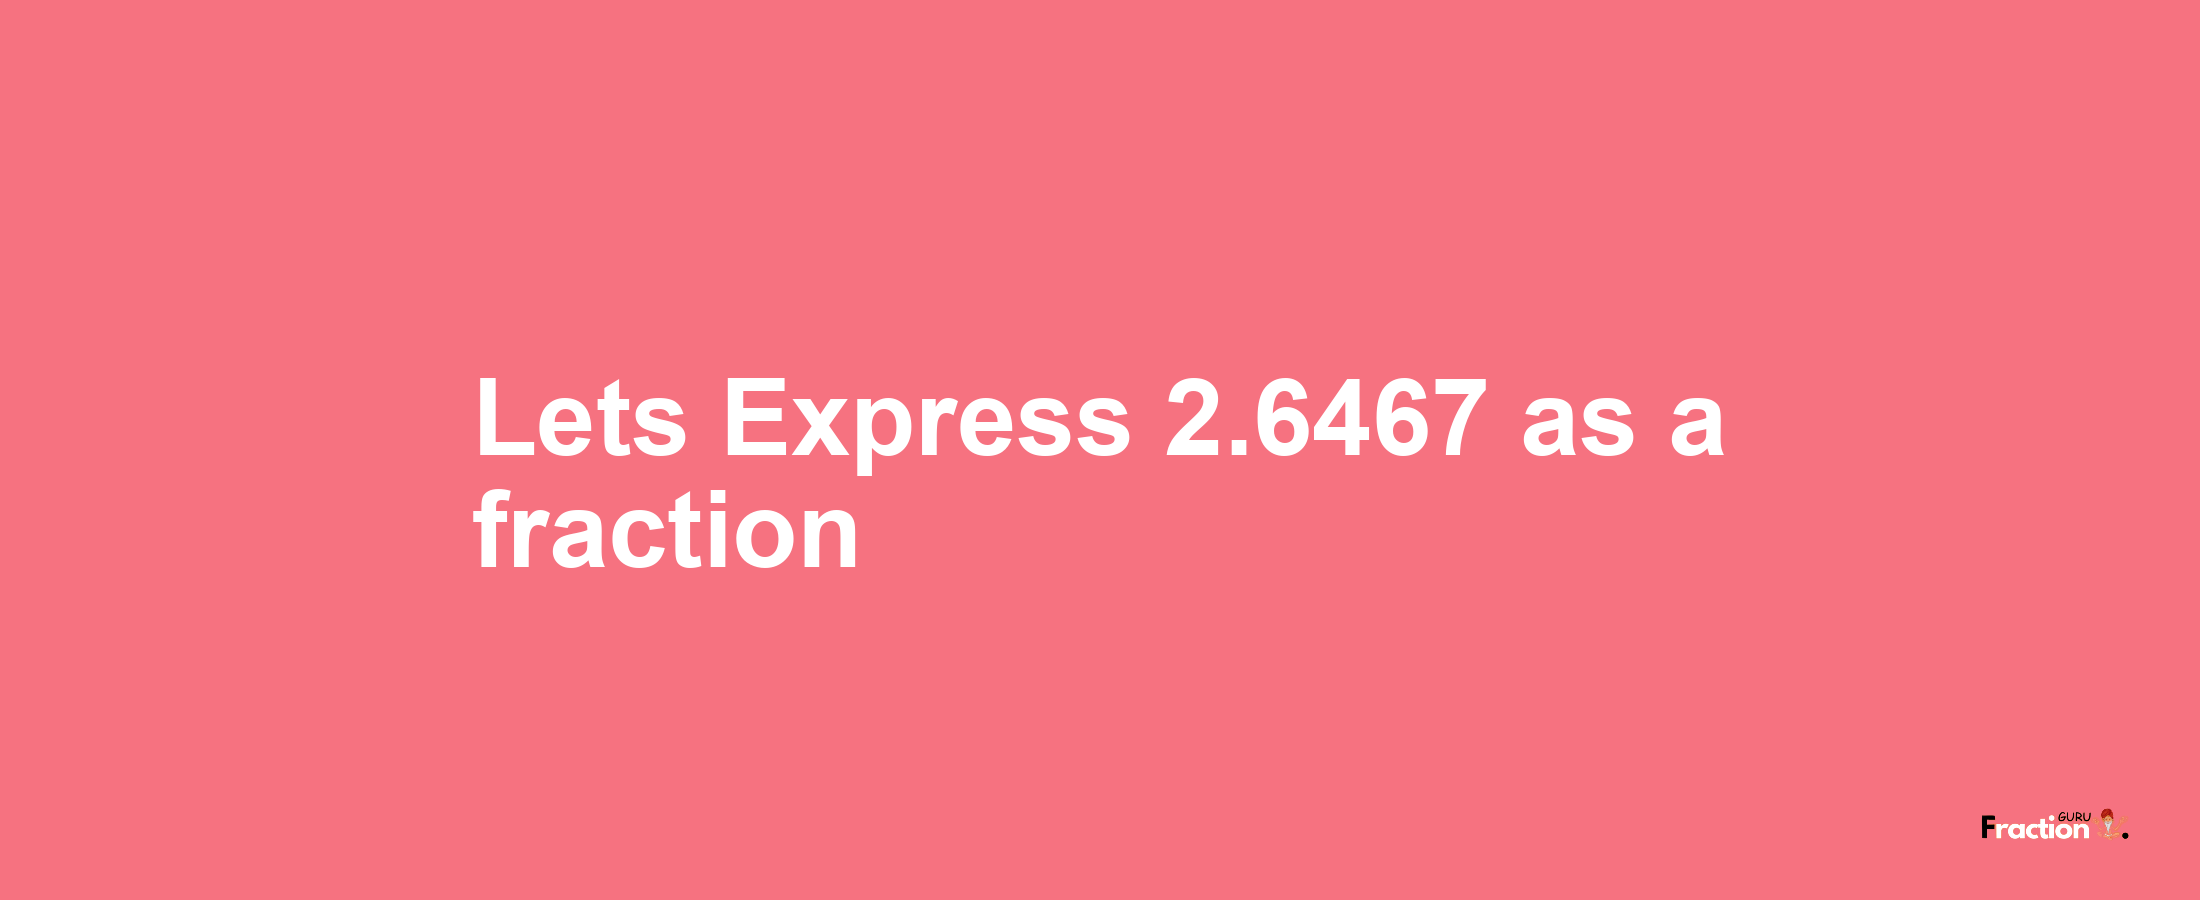 Lets Express 2.6467 as afraction